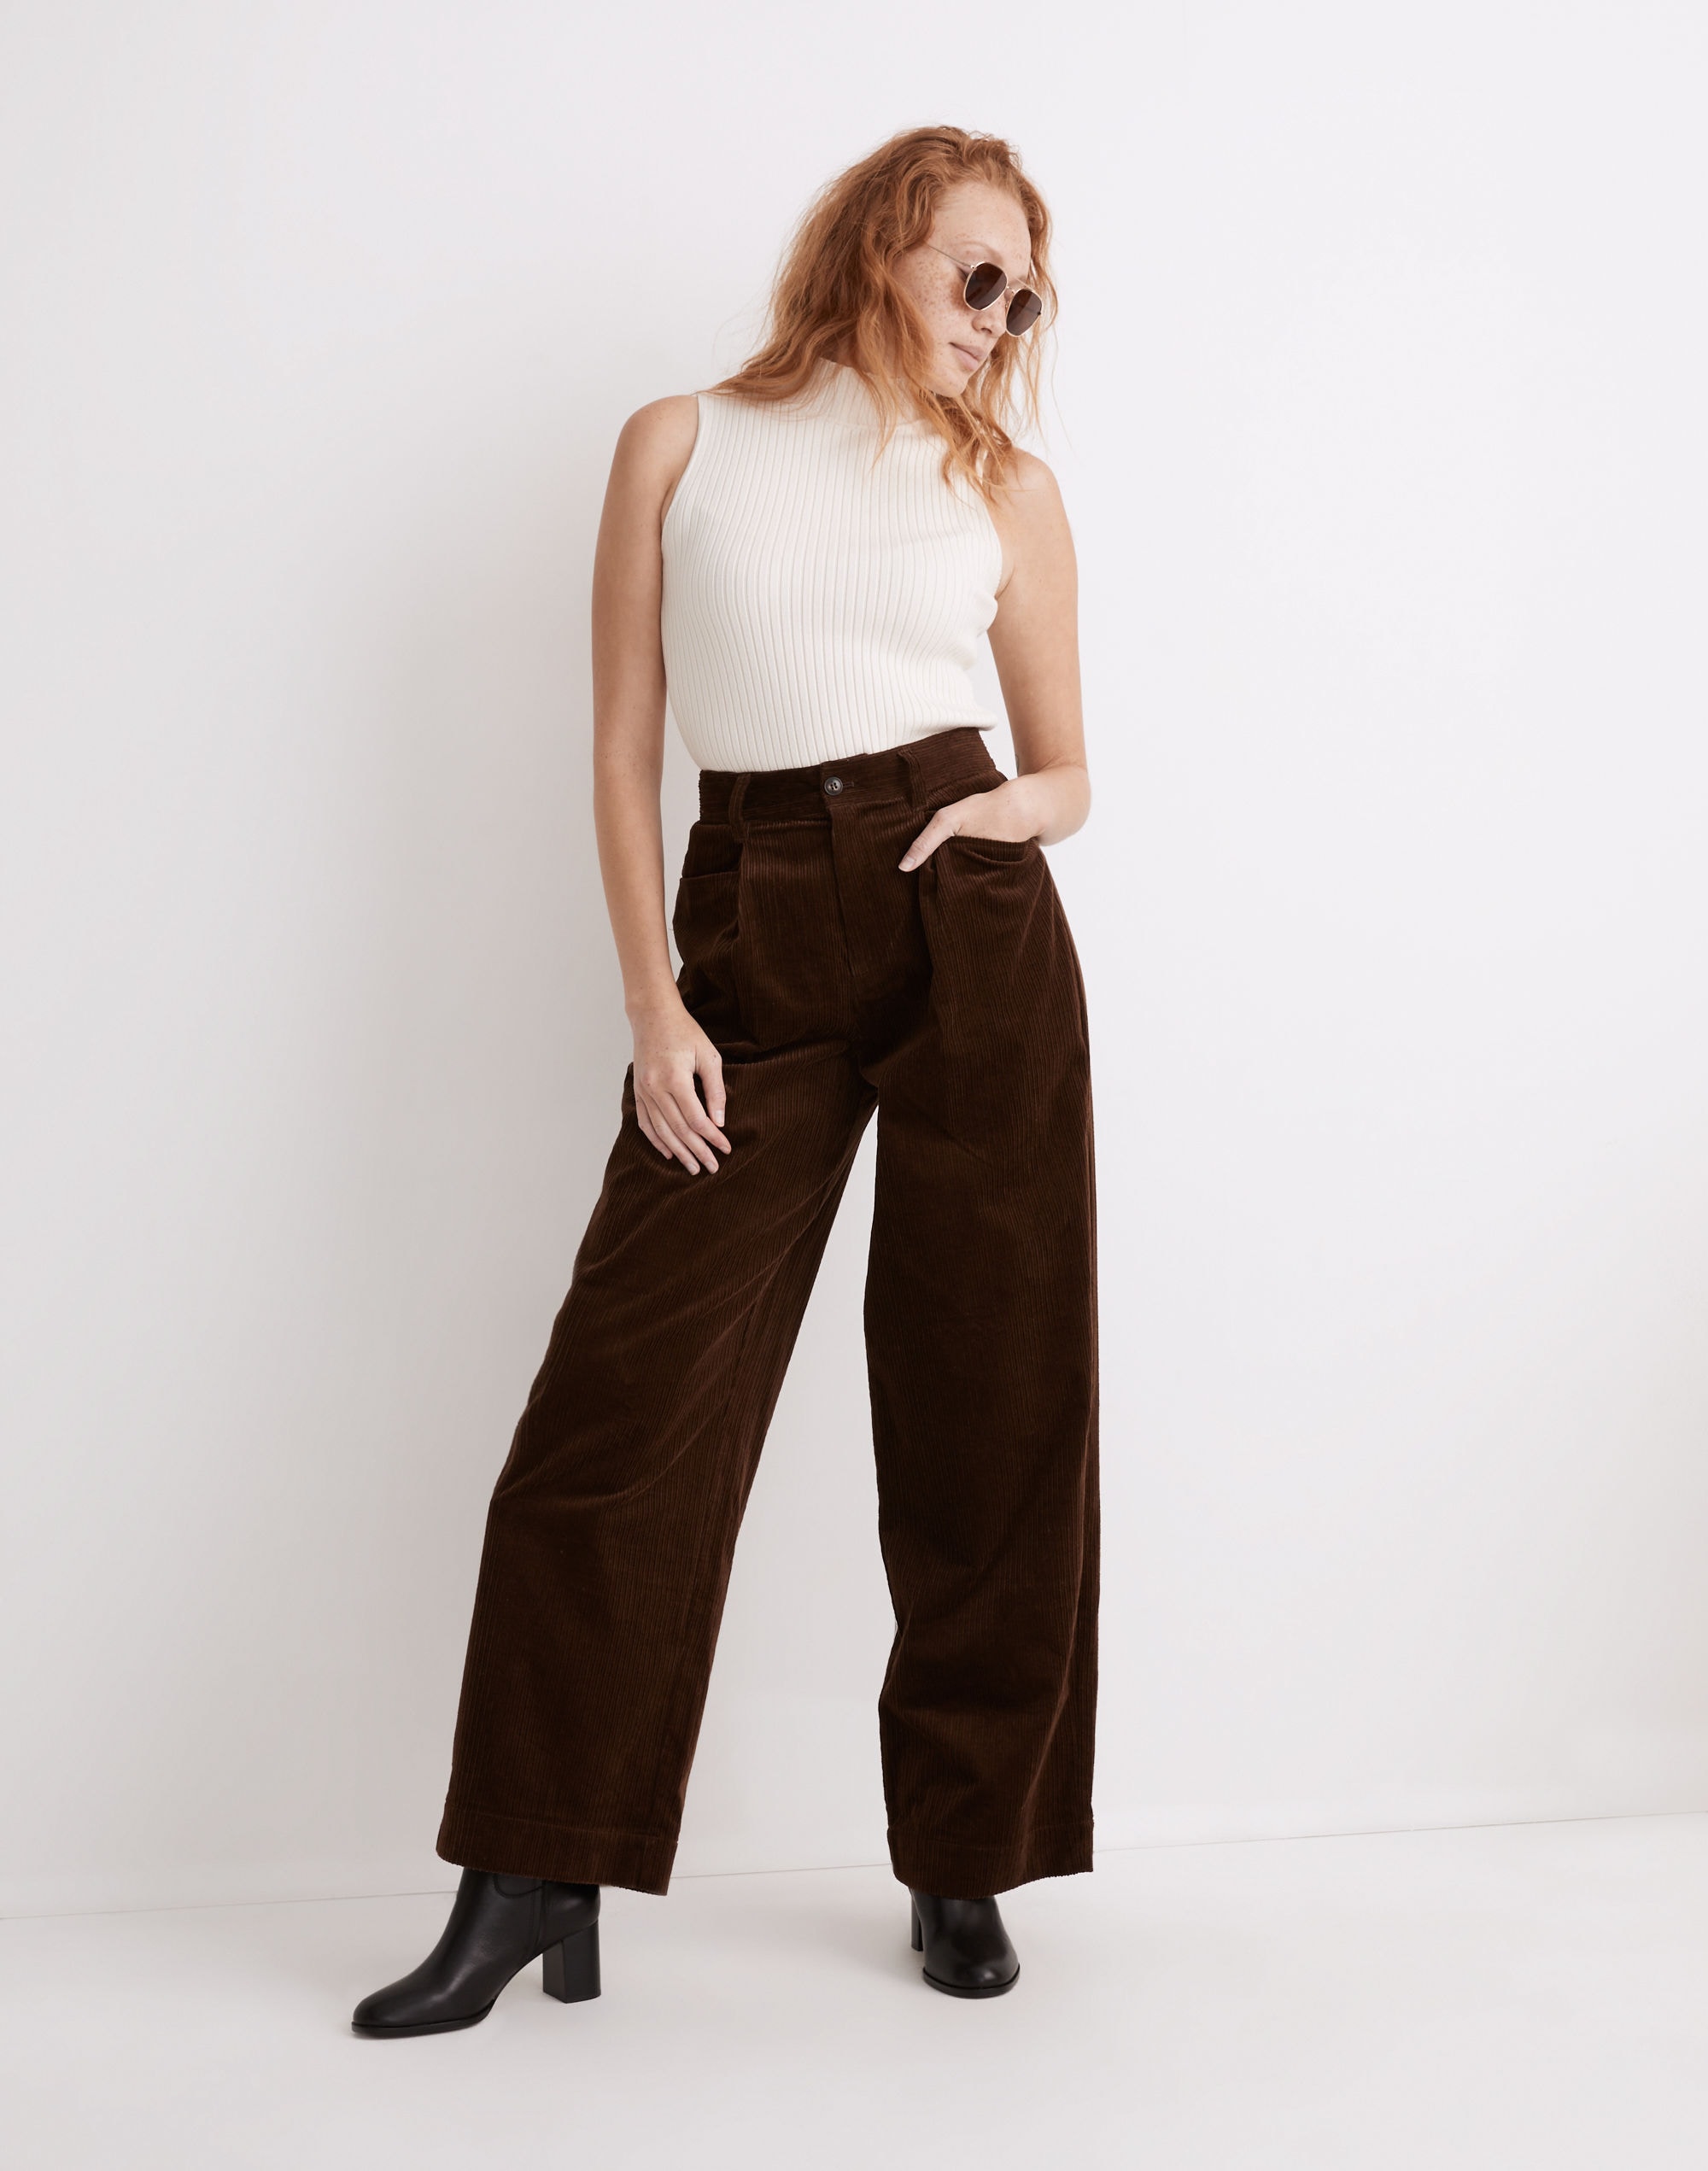 https://www.madewell.com/images/NG540_BR6471_m